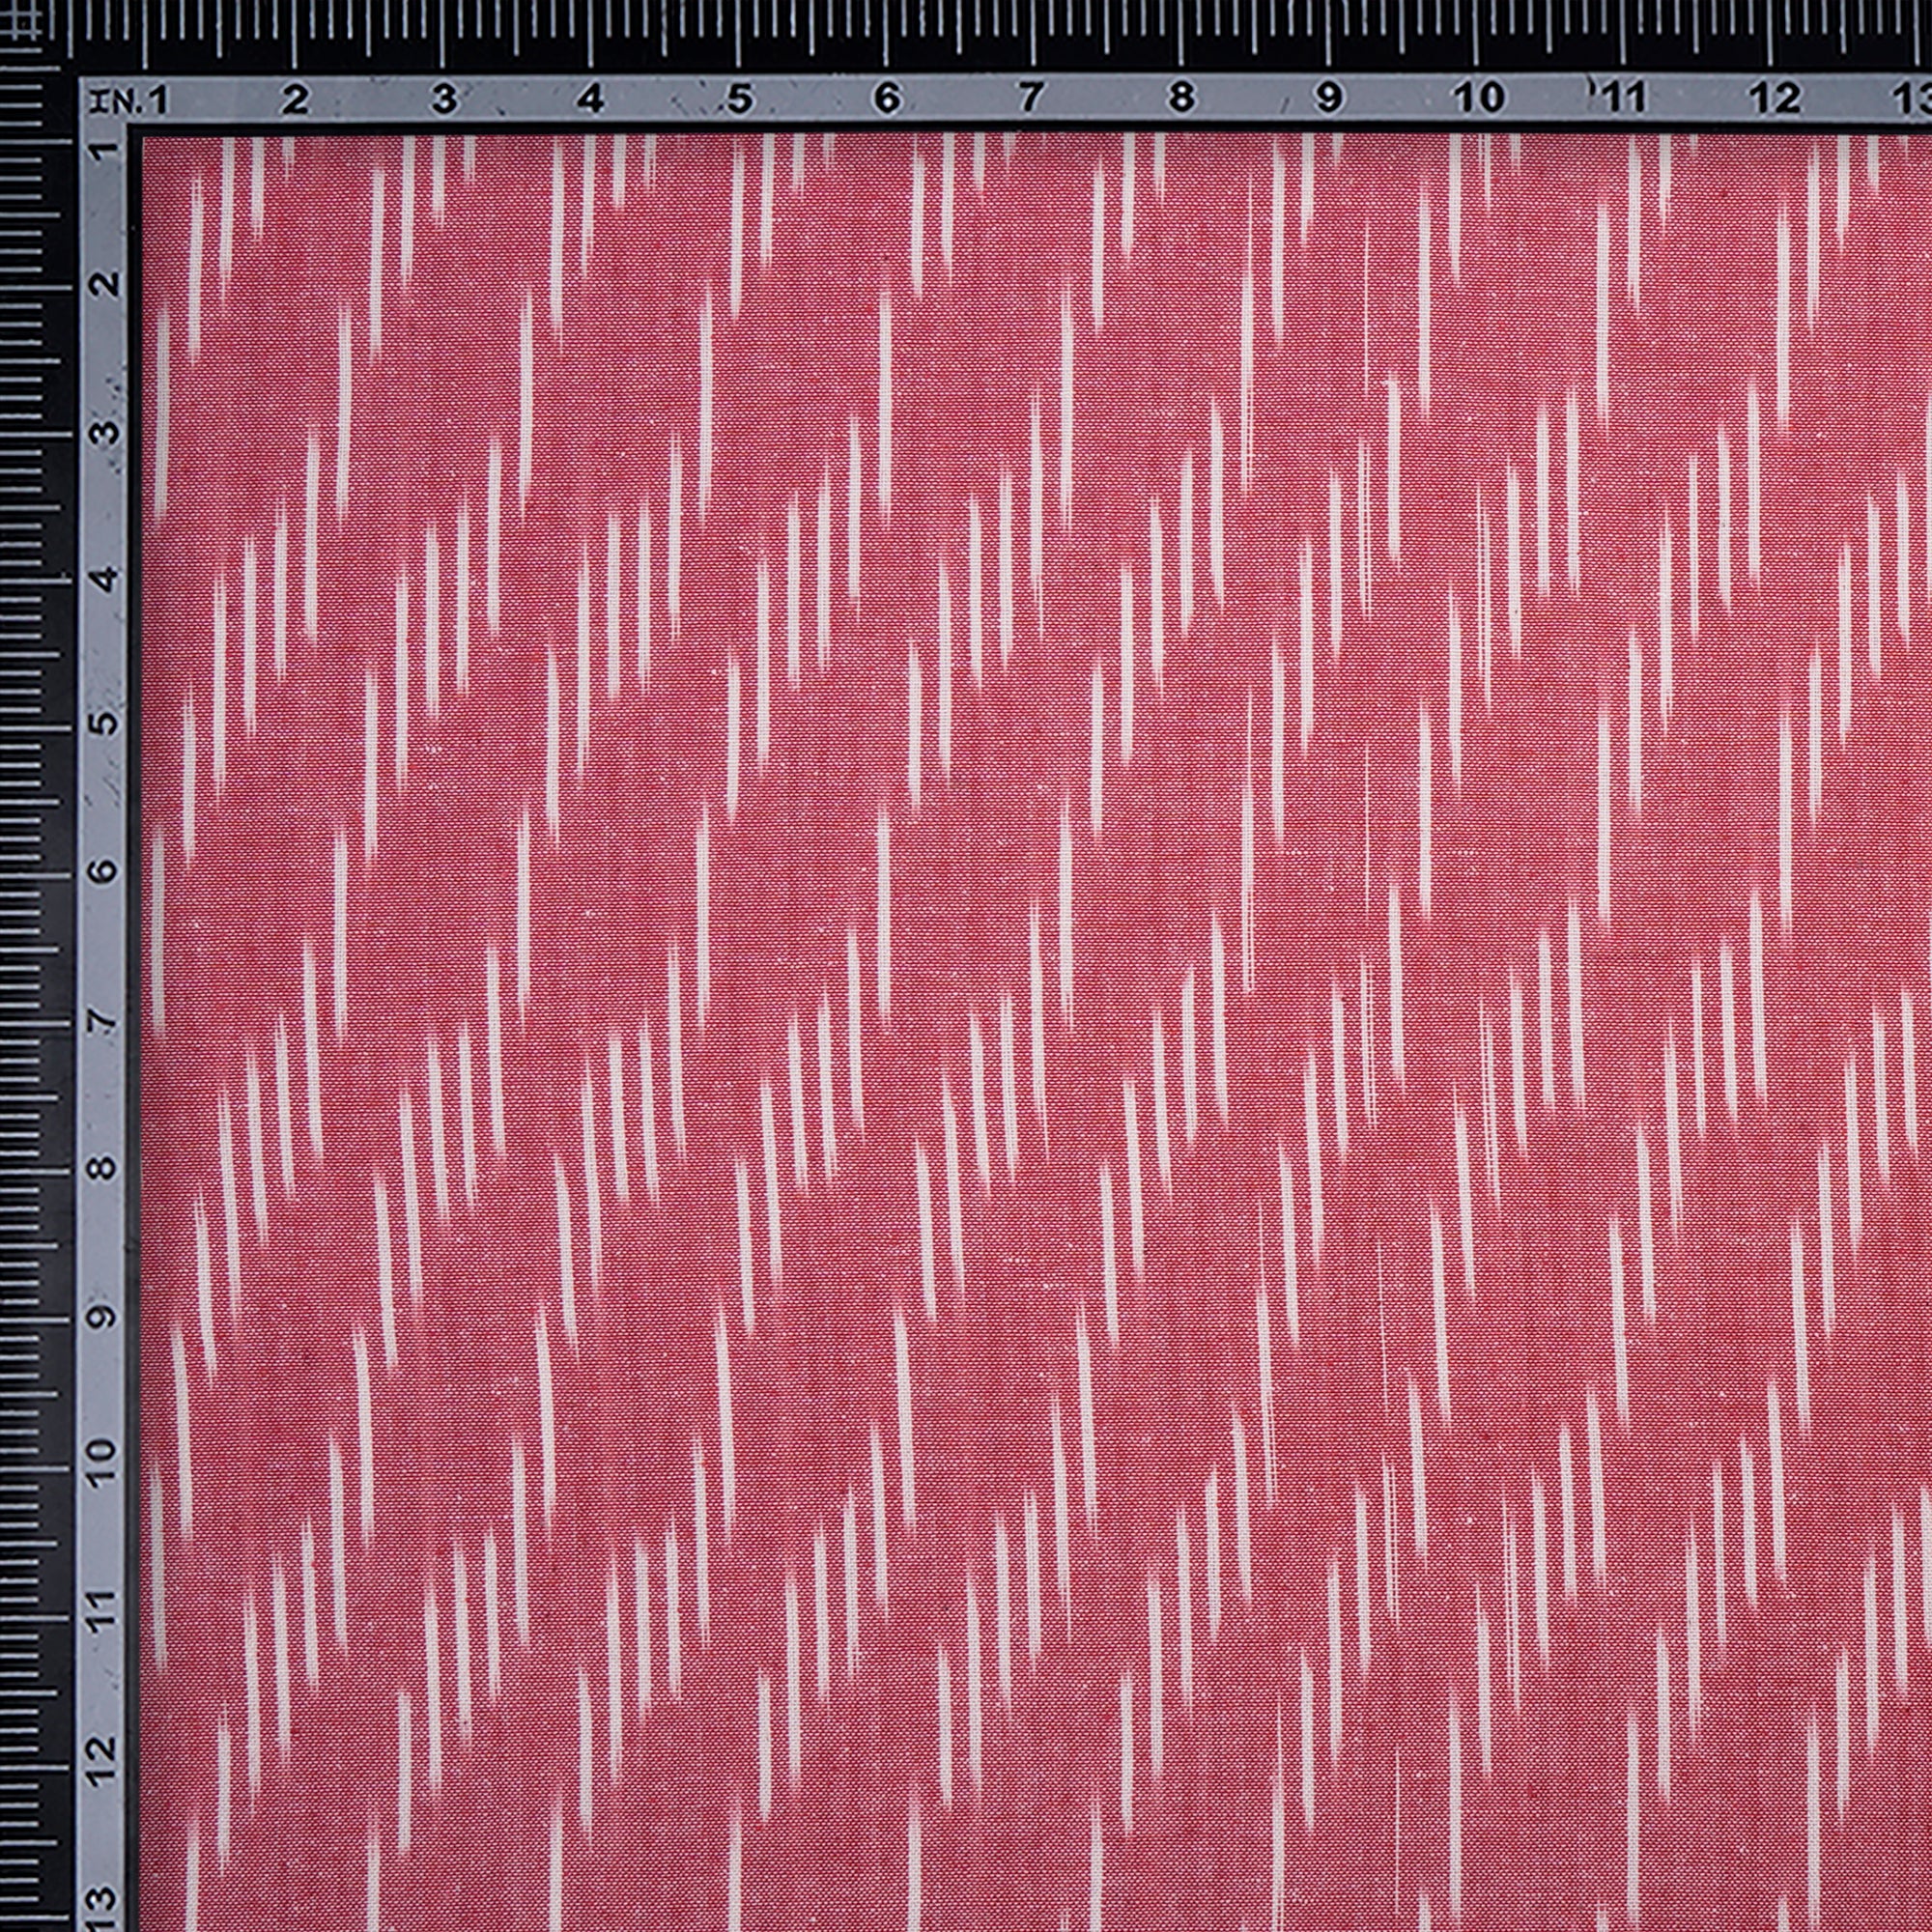 Light Coral Washed Woven Ikat Cotton Fabric